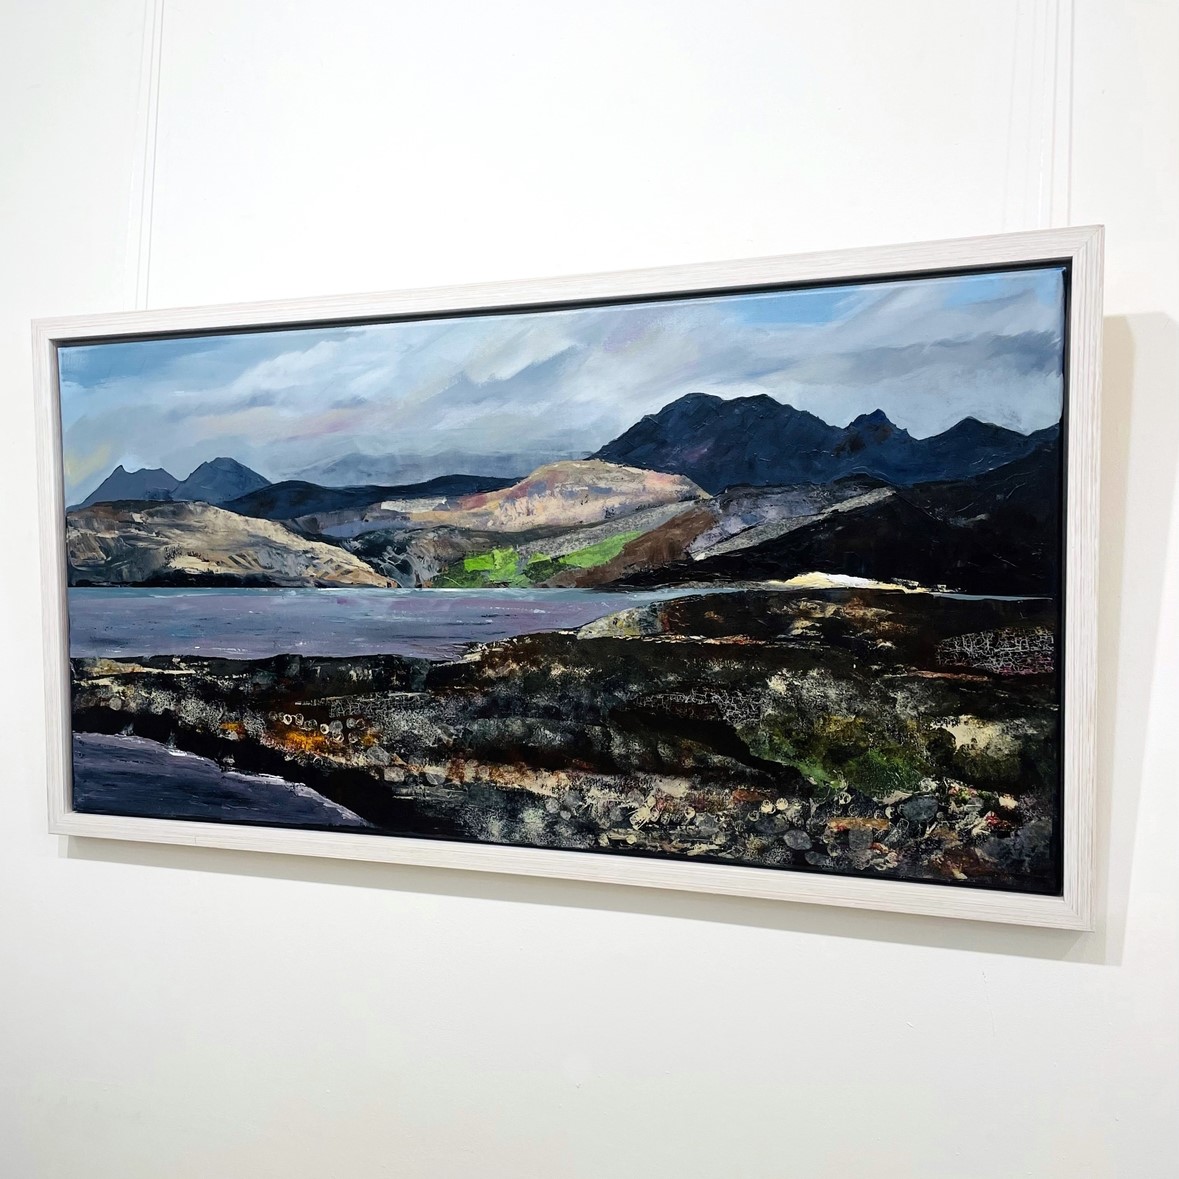 'The Cuillins from Ord' by artist Judith Appleby